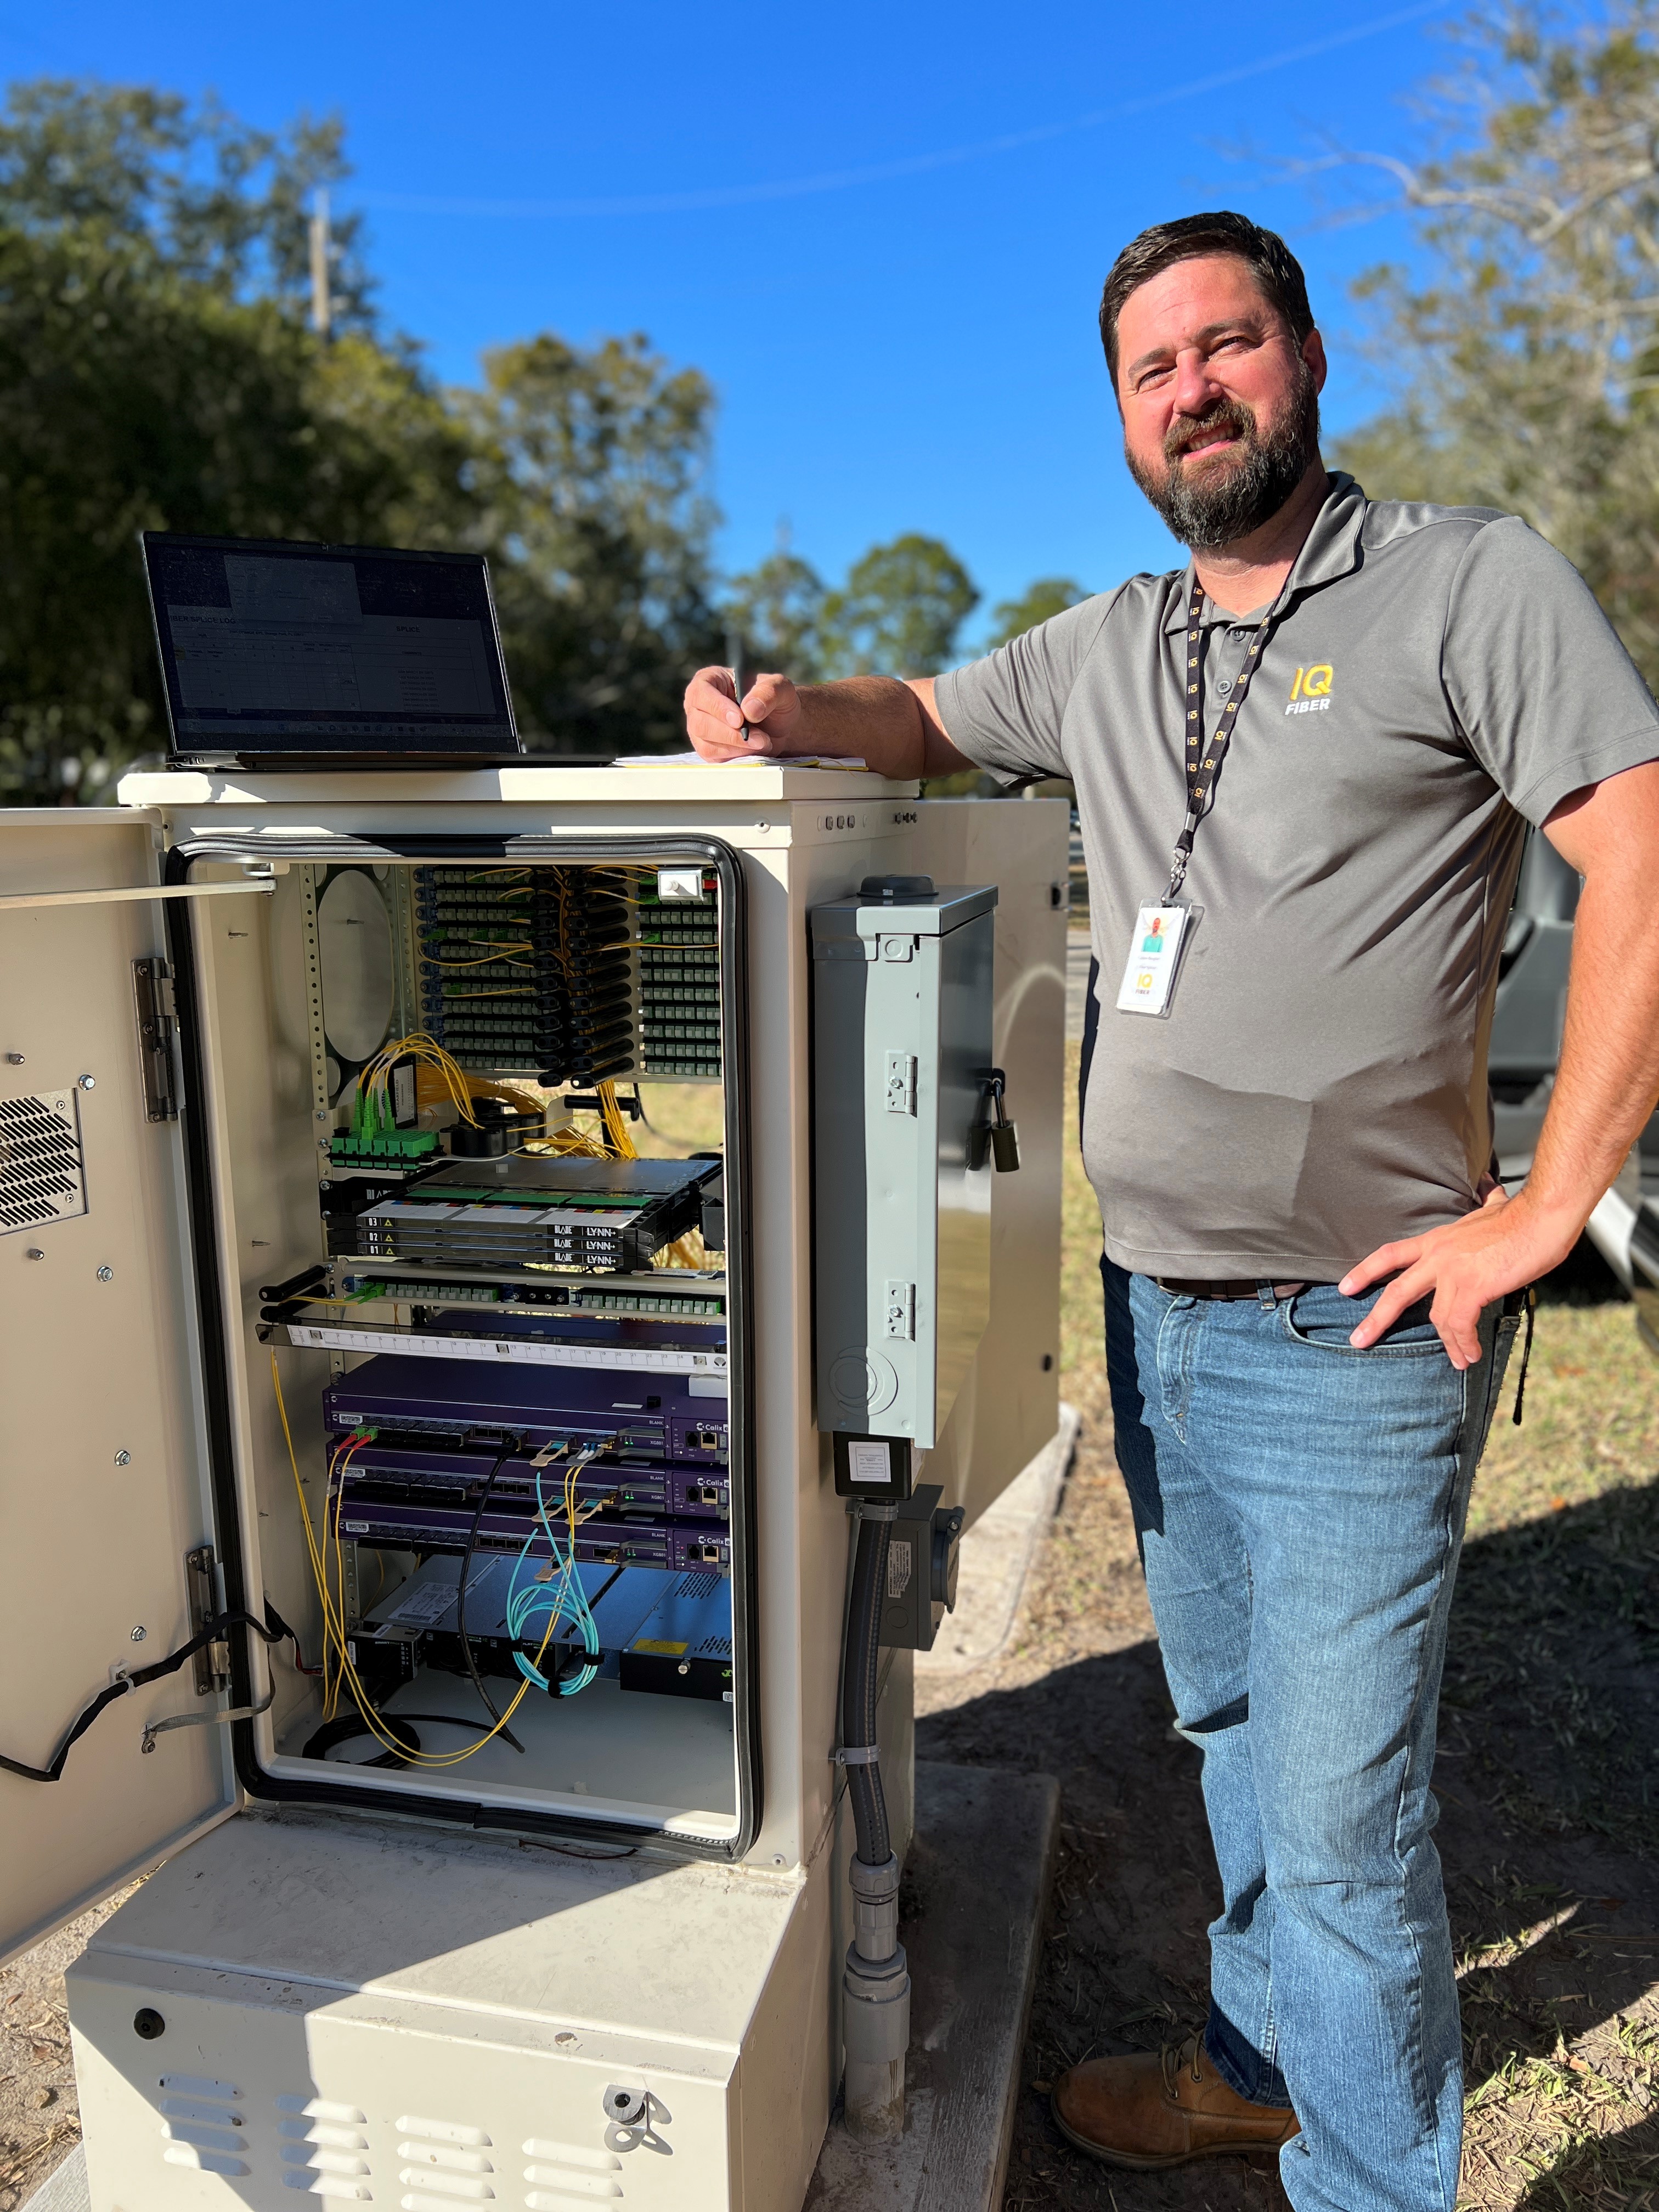 IQ Fiber engineer Jason Baugher (pictured) stands with a fiber-optic cabinet. These metal boxes protect fiber-optic cables from the elements and provide easy access for maintenance and upgrades.